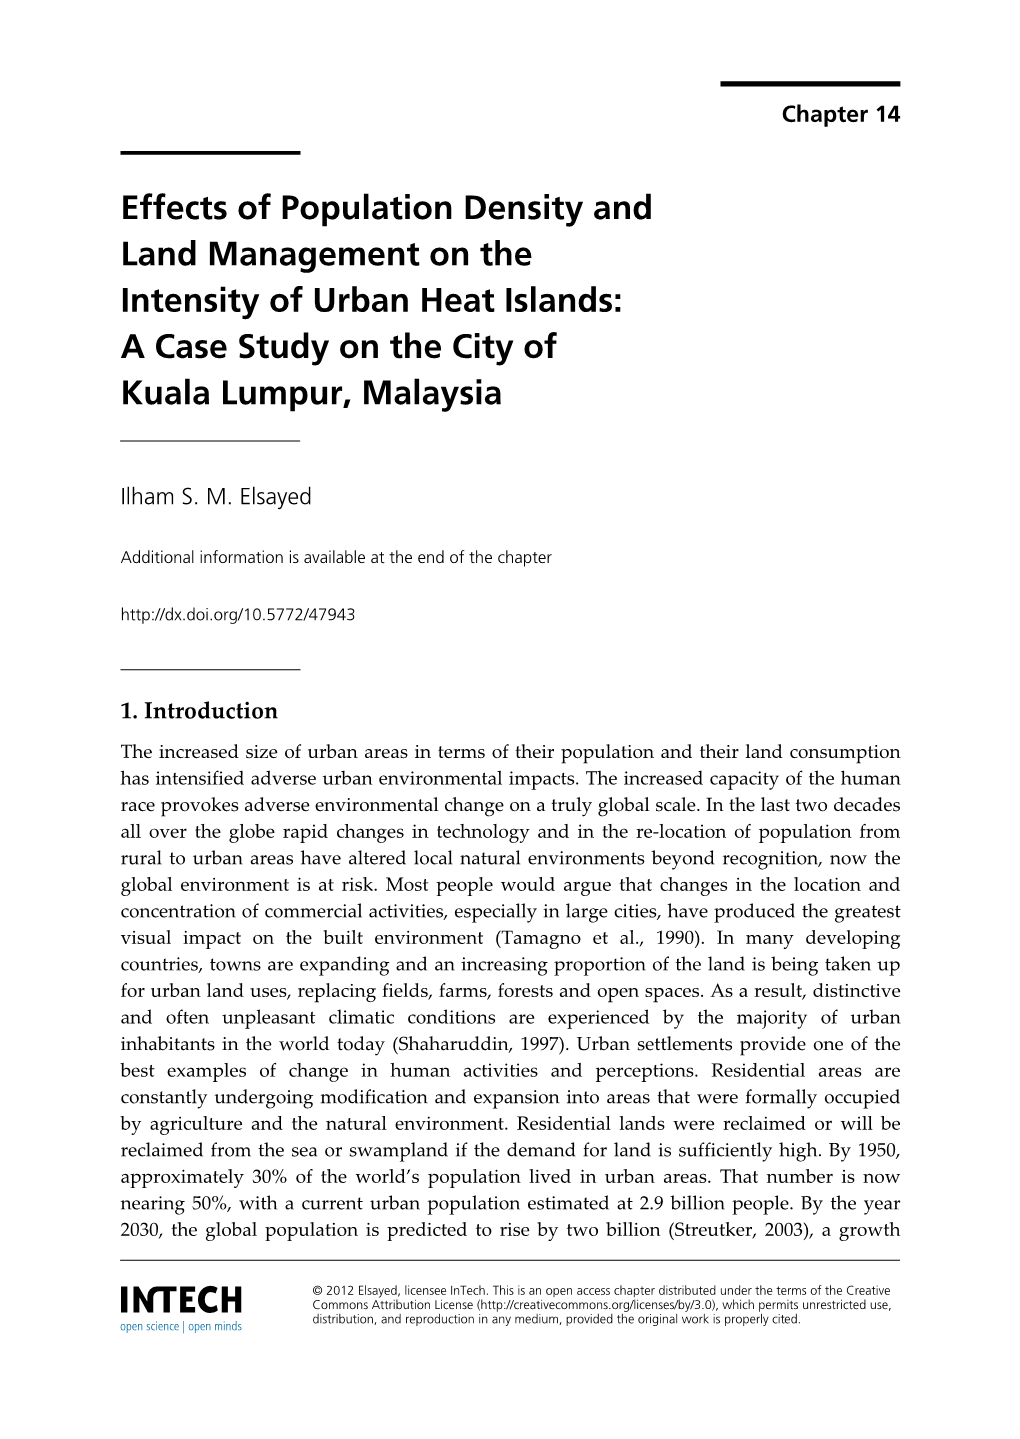 Effects of Population Density and Land Management on the Intensity of Urban Heat Islands: a Case Study on the City of Kuala Lumpur, Malaysia